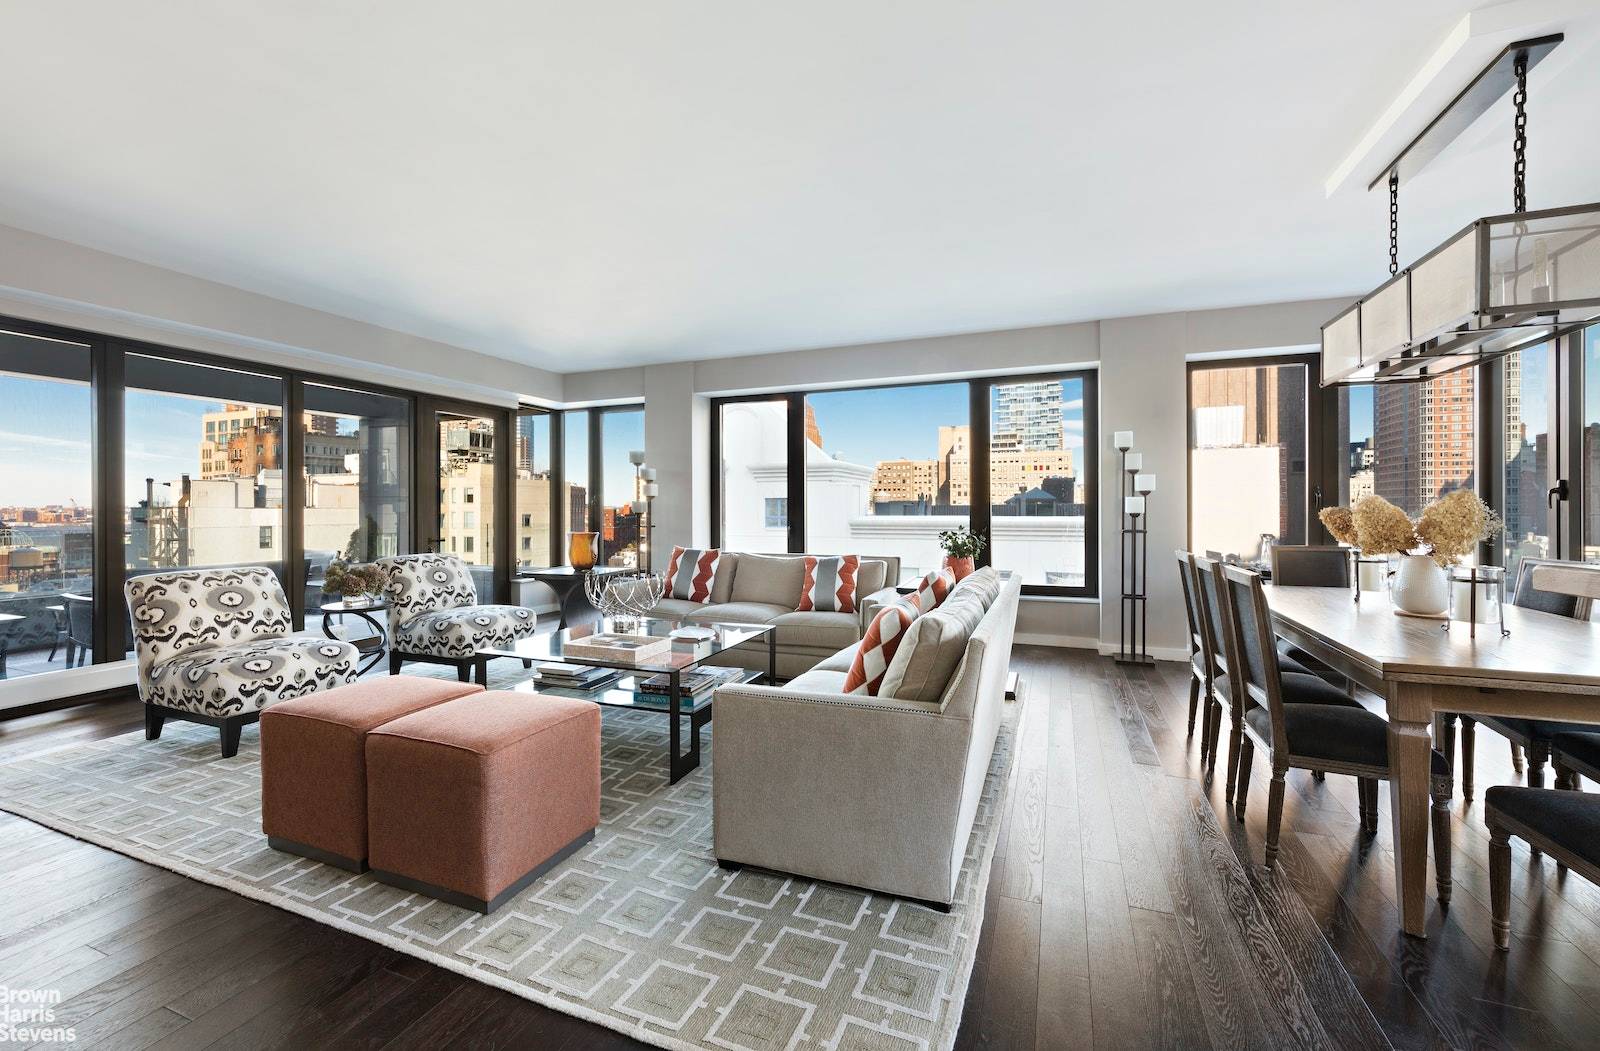 Situated in the esteemed Warren Lofts a pet friendly, 17 unit building Penthouse B is an impeccable, full floor residence with stunning views of the Midtown and Downtown skylines.